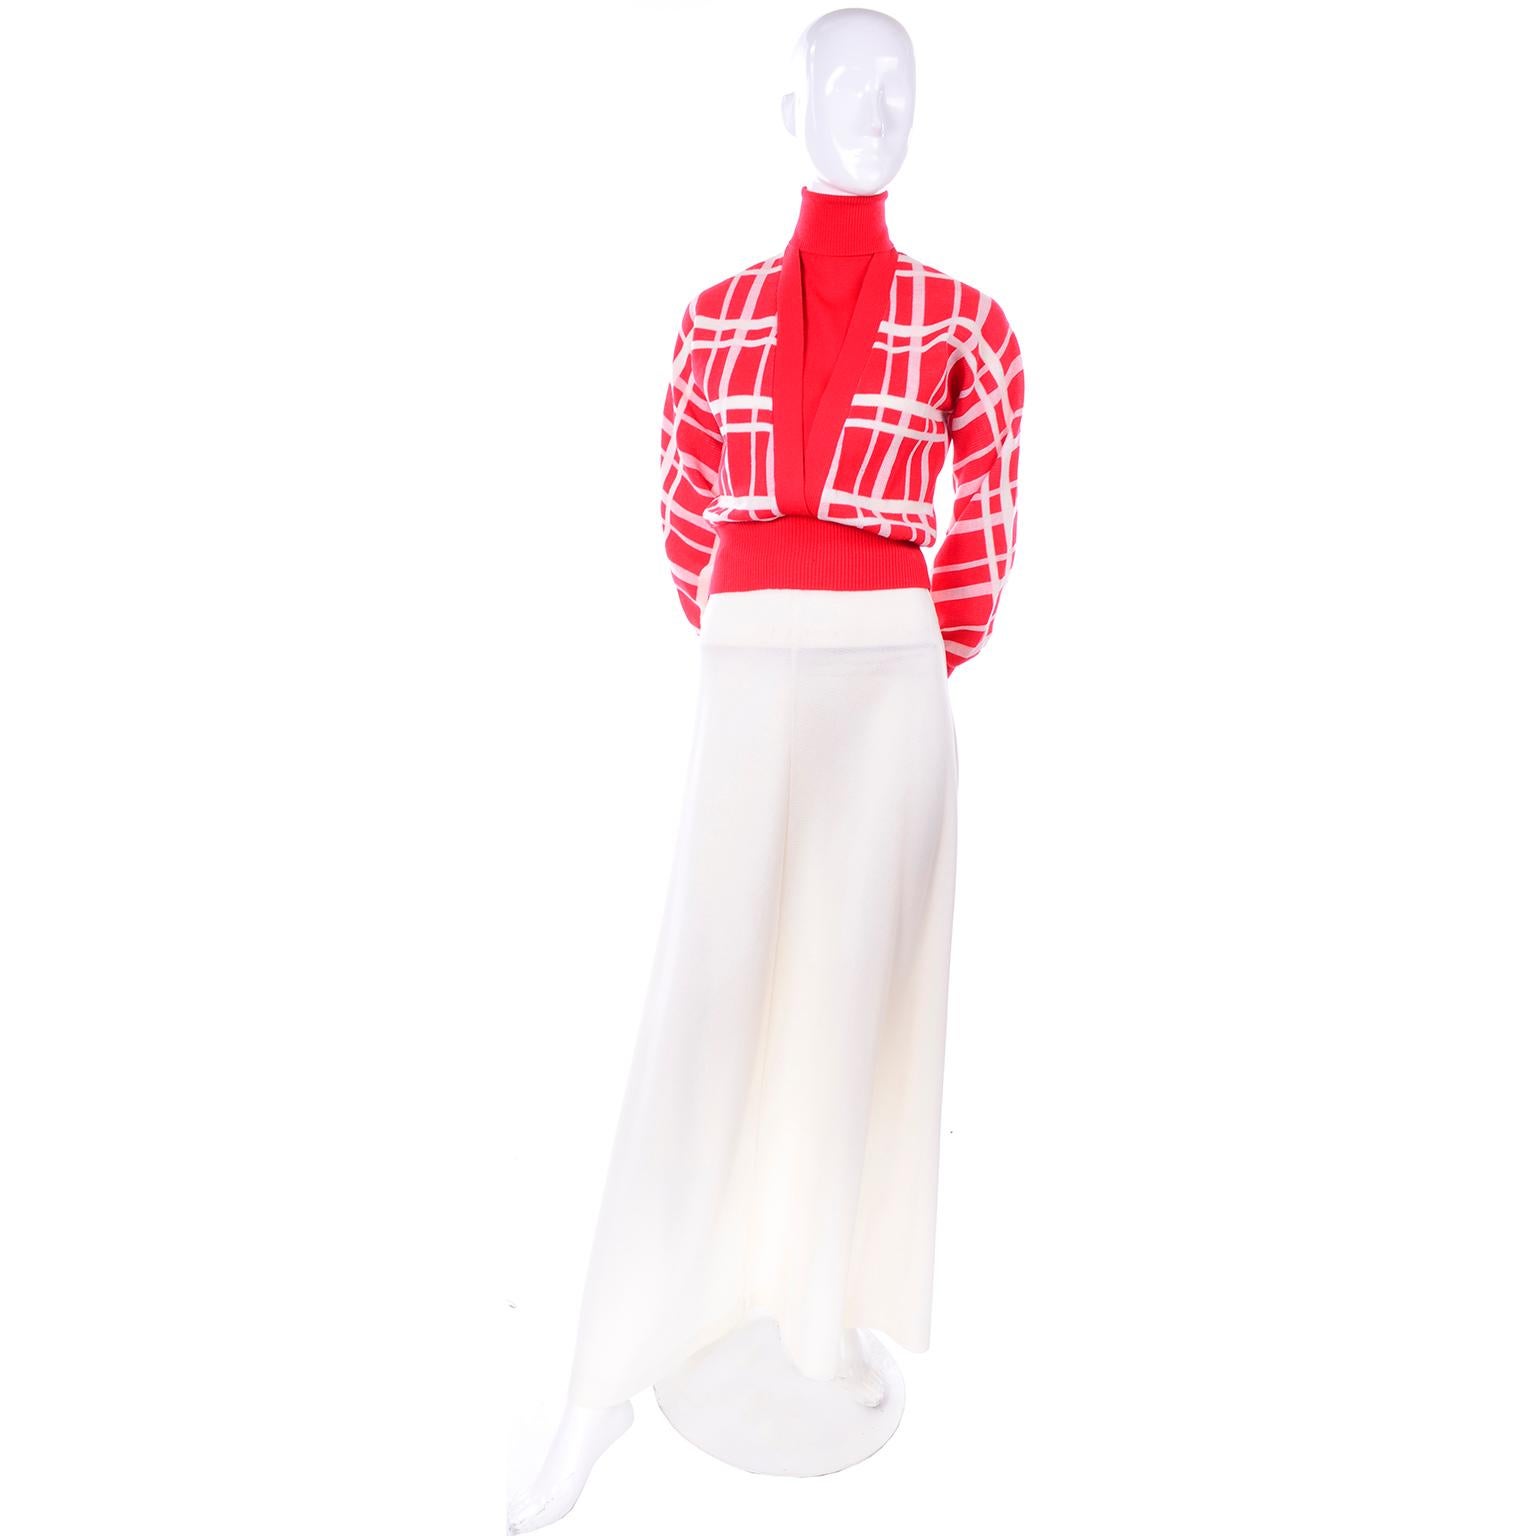 This is a wonderful, unworn, two piece knit outfit by Crissa Linea Italiana with the original tags. It has a turtleneck sweater top and maxi skirt. The top is red with white plaid stripes, and the long skirt is white. Made in Italy, Polyester